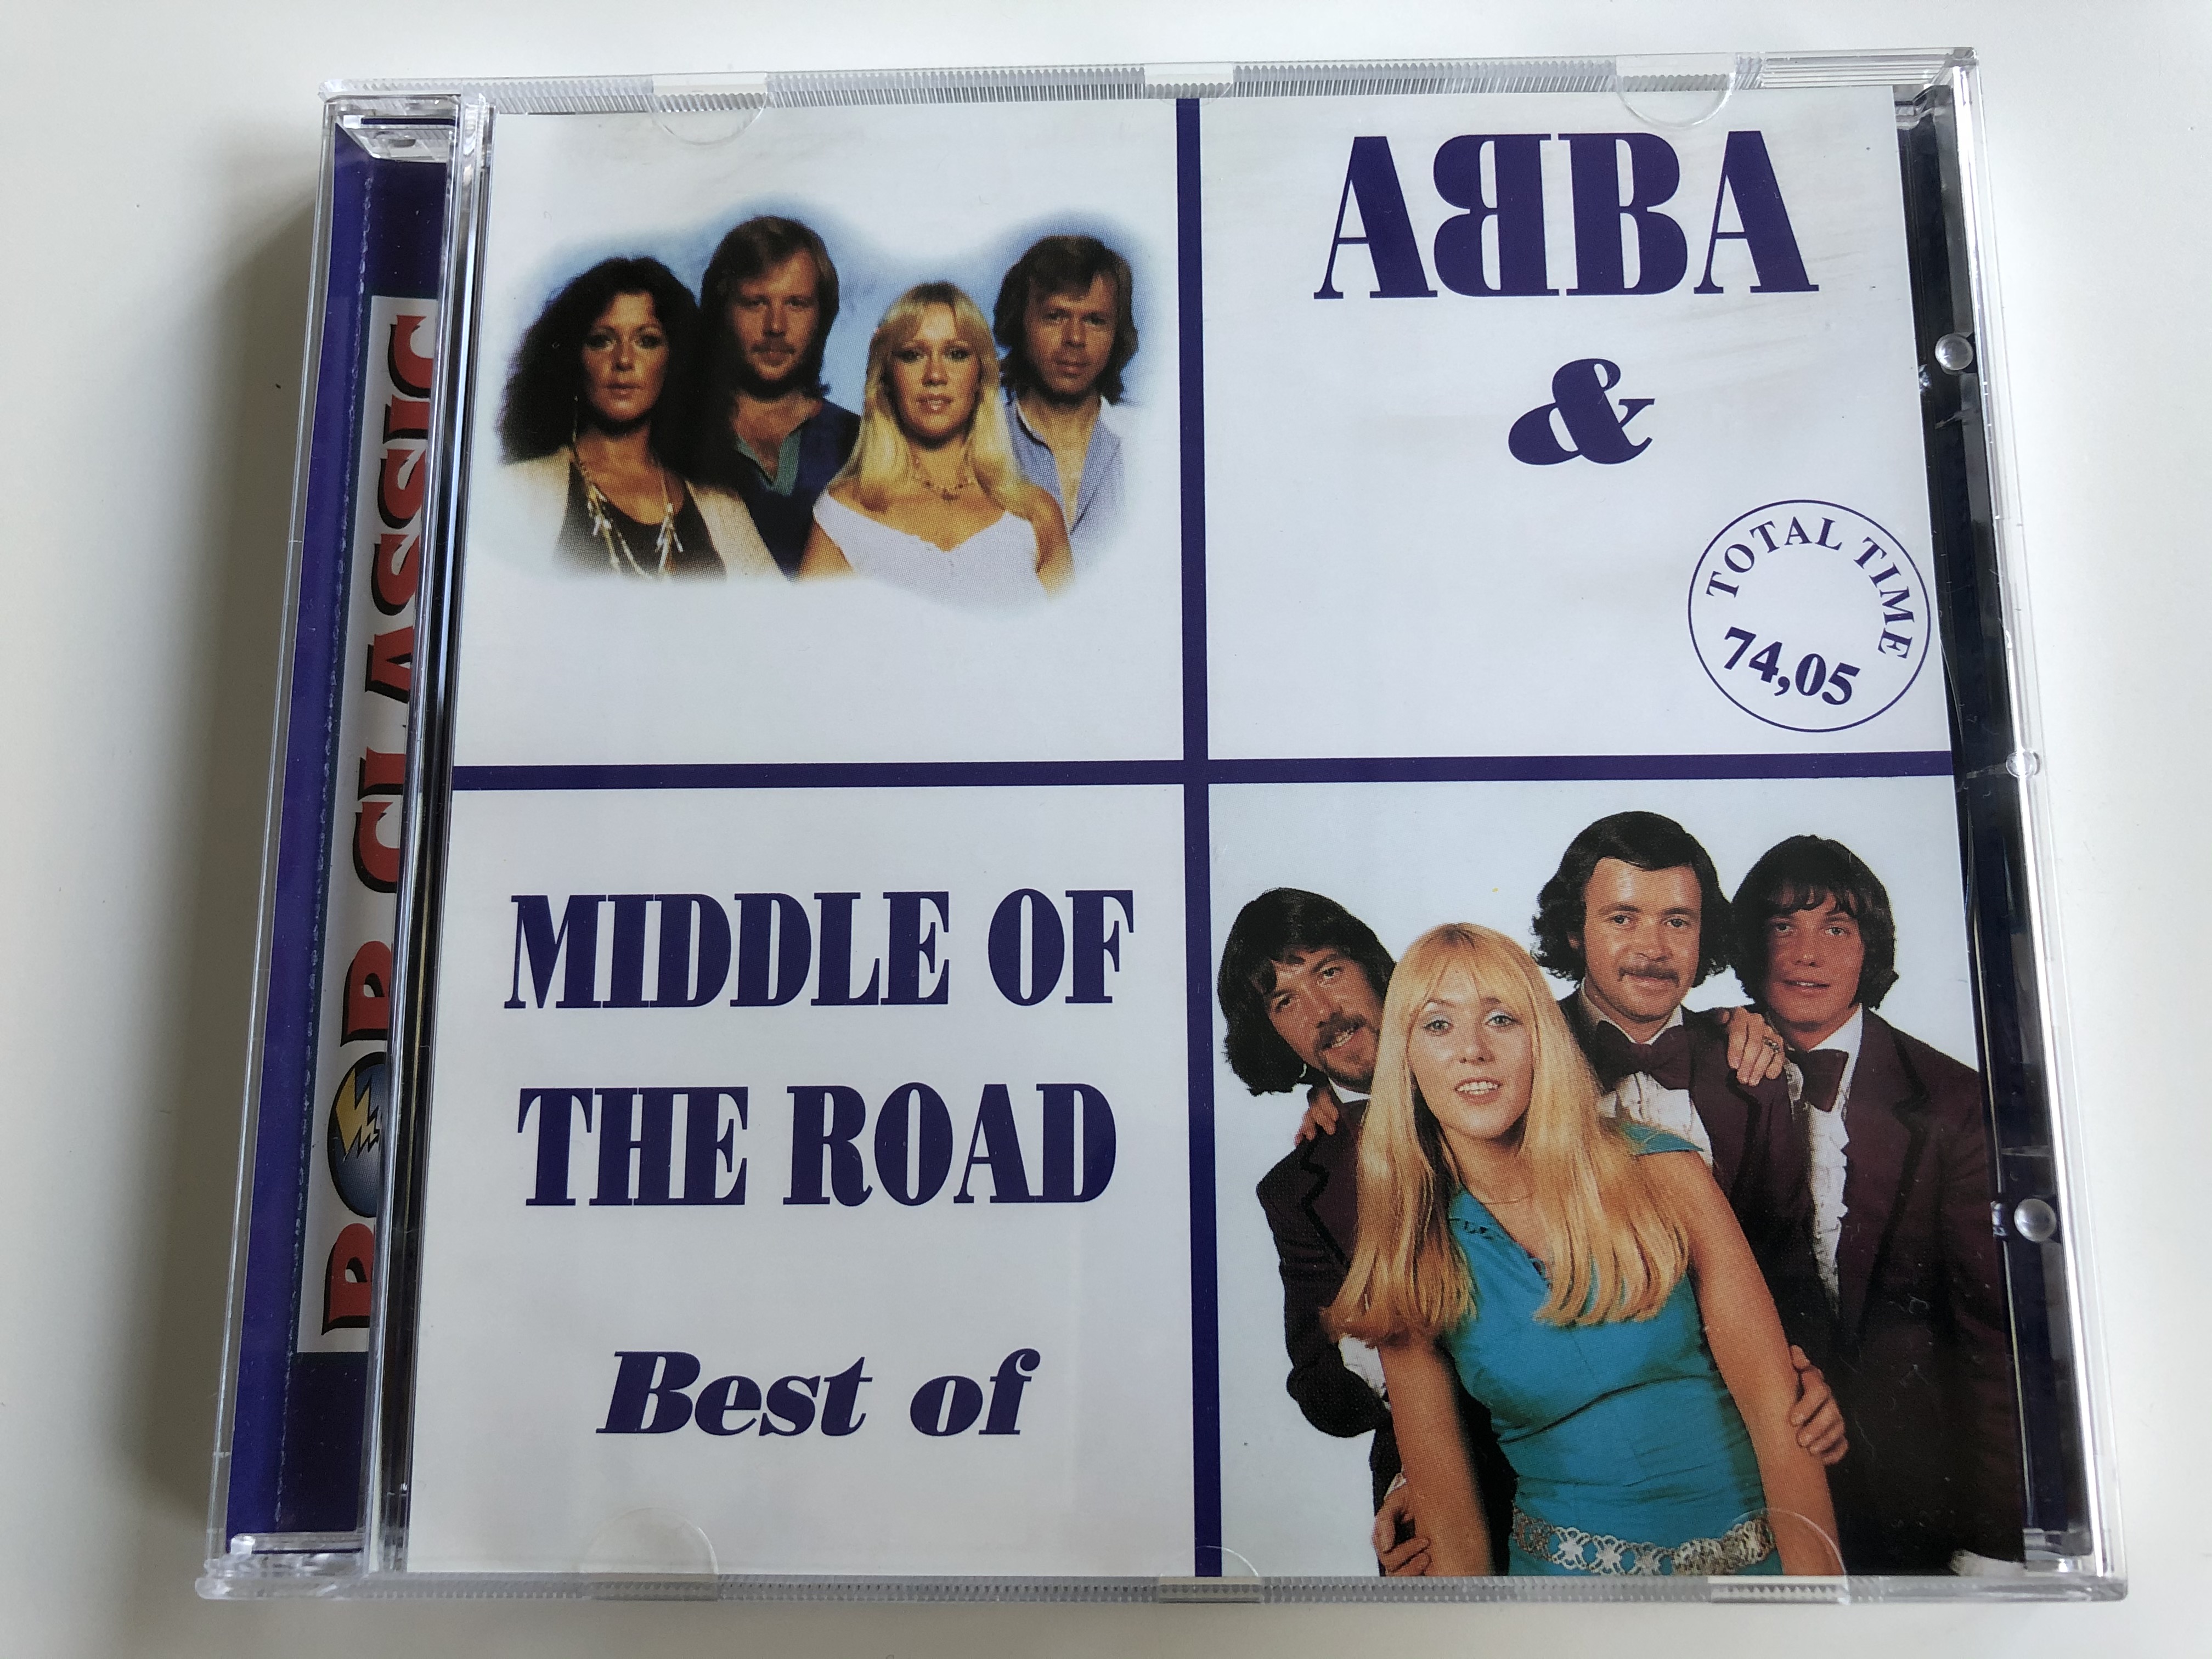 abba-middle-of-the-road-best-of-pop-classic-euroton-audio-cd-eucd-0075-1-.jpg